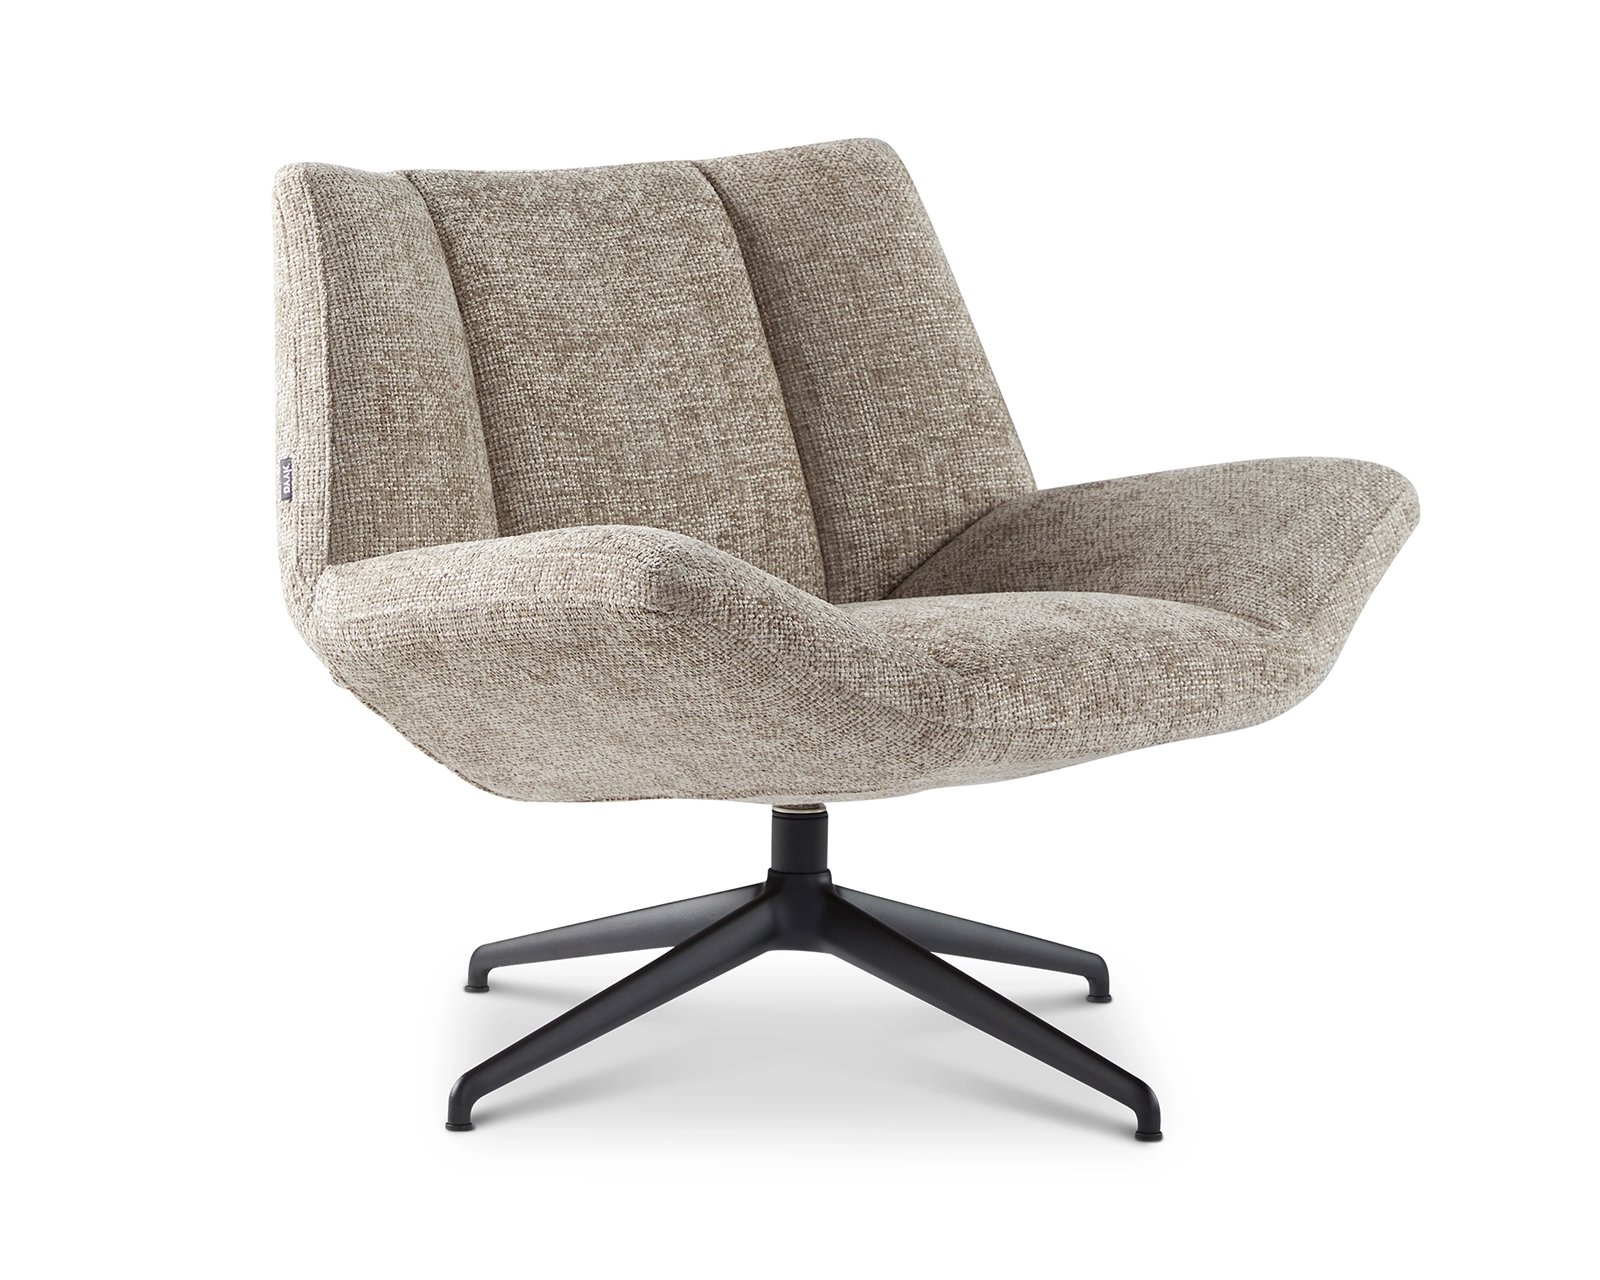 haag Afwijzen puur Moderne relaxfauteuil Amy | Table du Sud